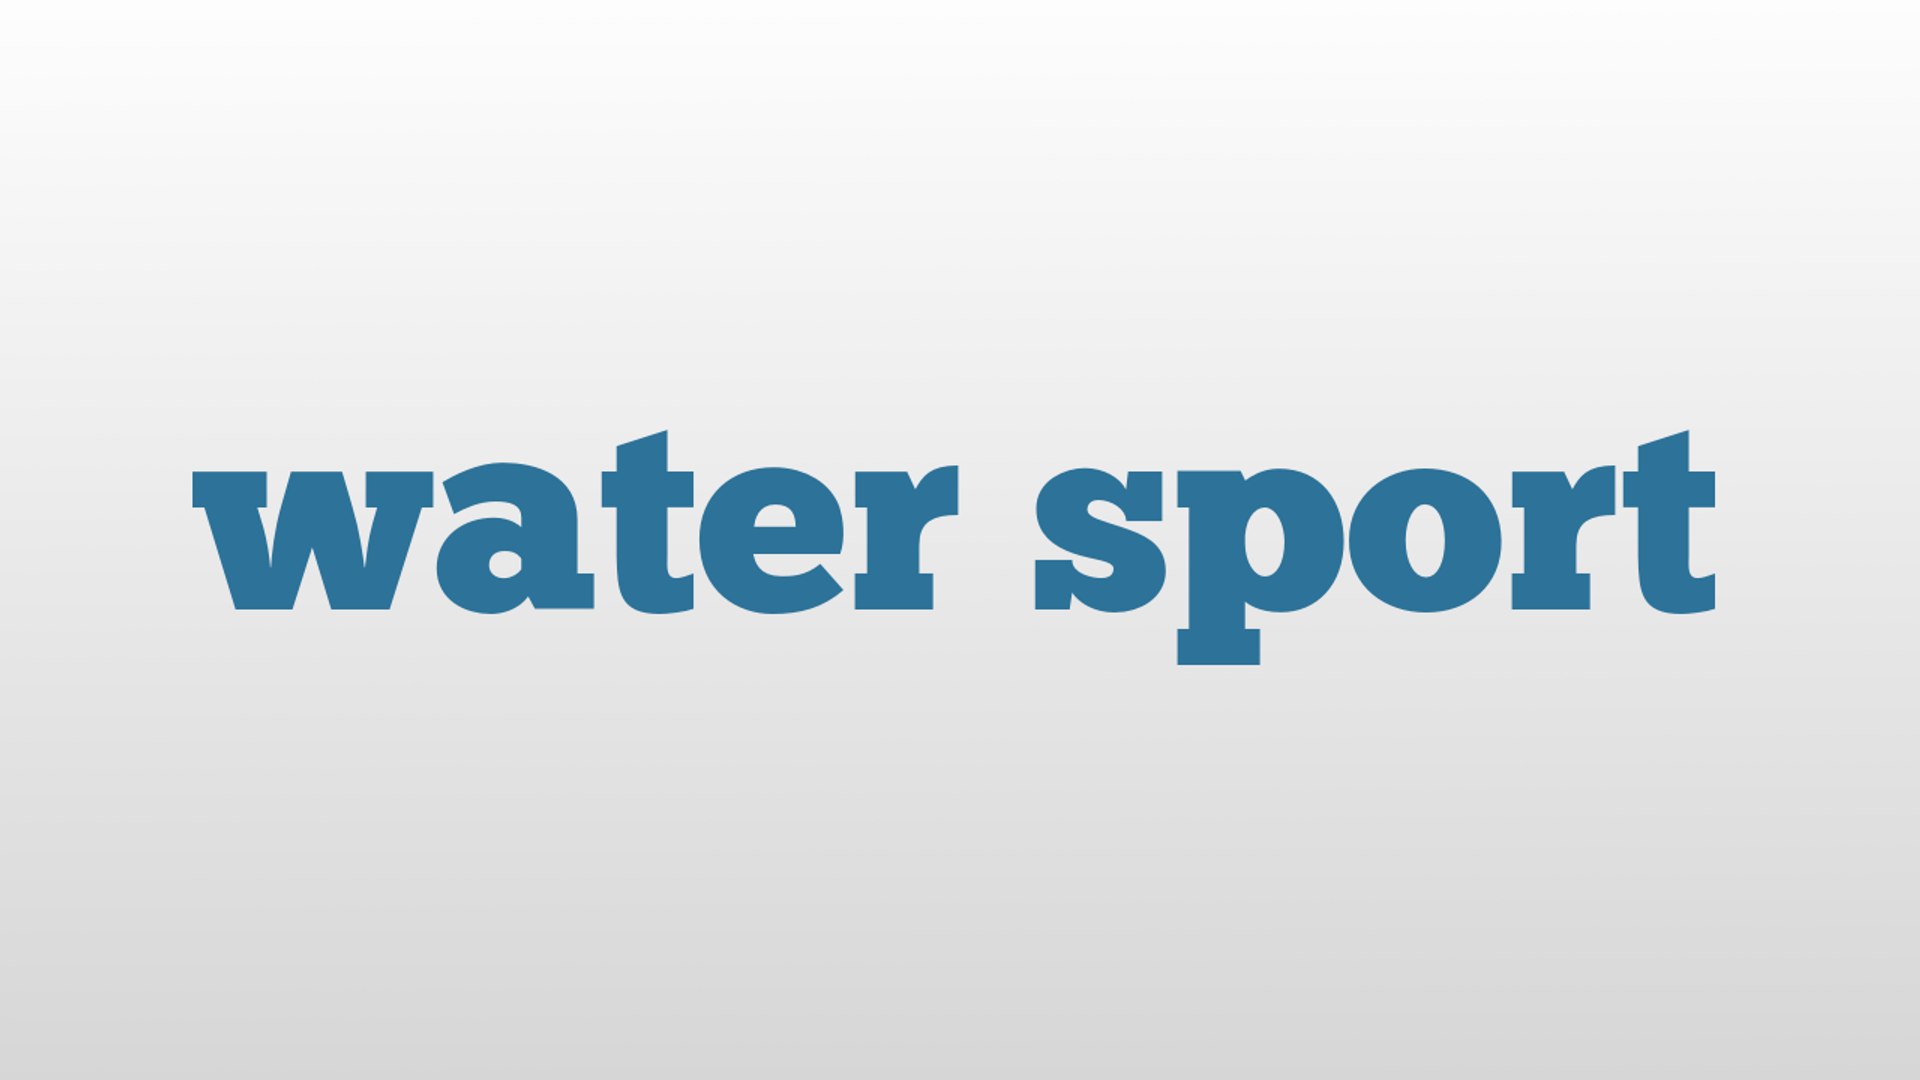 Watersports Definition Urban Dictionary